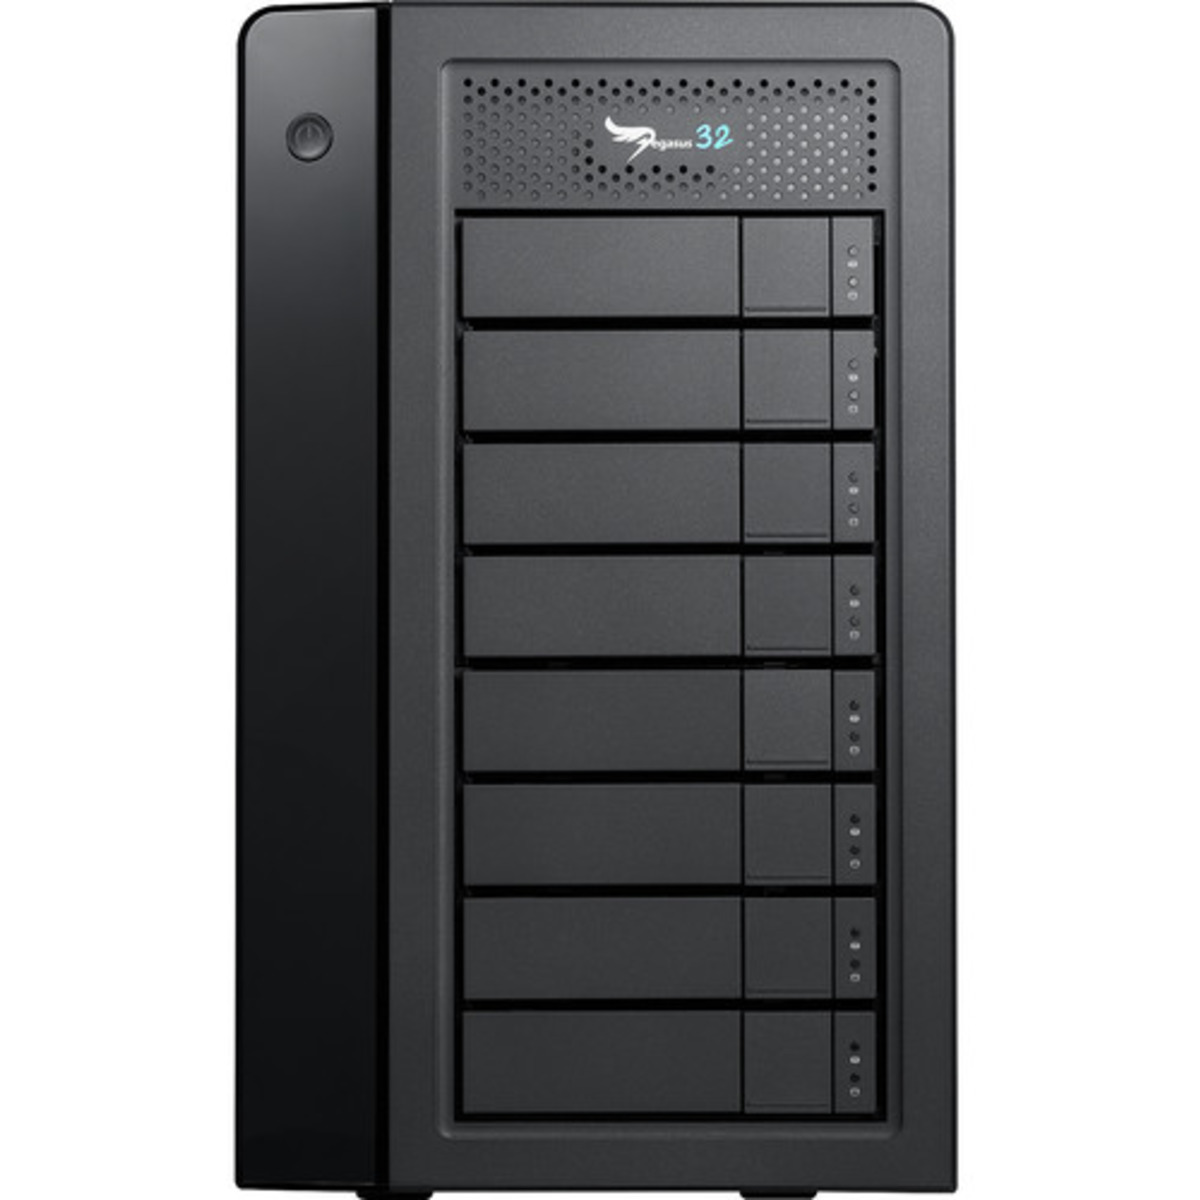 Promise Technology Pegasus32 R8 Thunderbolt 3 64tb 8-Bay Desktop Multimedia / Power User / Business DAS - Direct Attached Storage Device 4x16tb Toshiba Enterprise Capacity MG08ACA16TE 3.5 7200rpm SATA 6Gb/s HDD ENTERPRISE Class Drives Installed - Burn-In Tested - ON SALE Pegasus32 R8 Thunderbolt 3